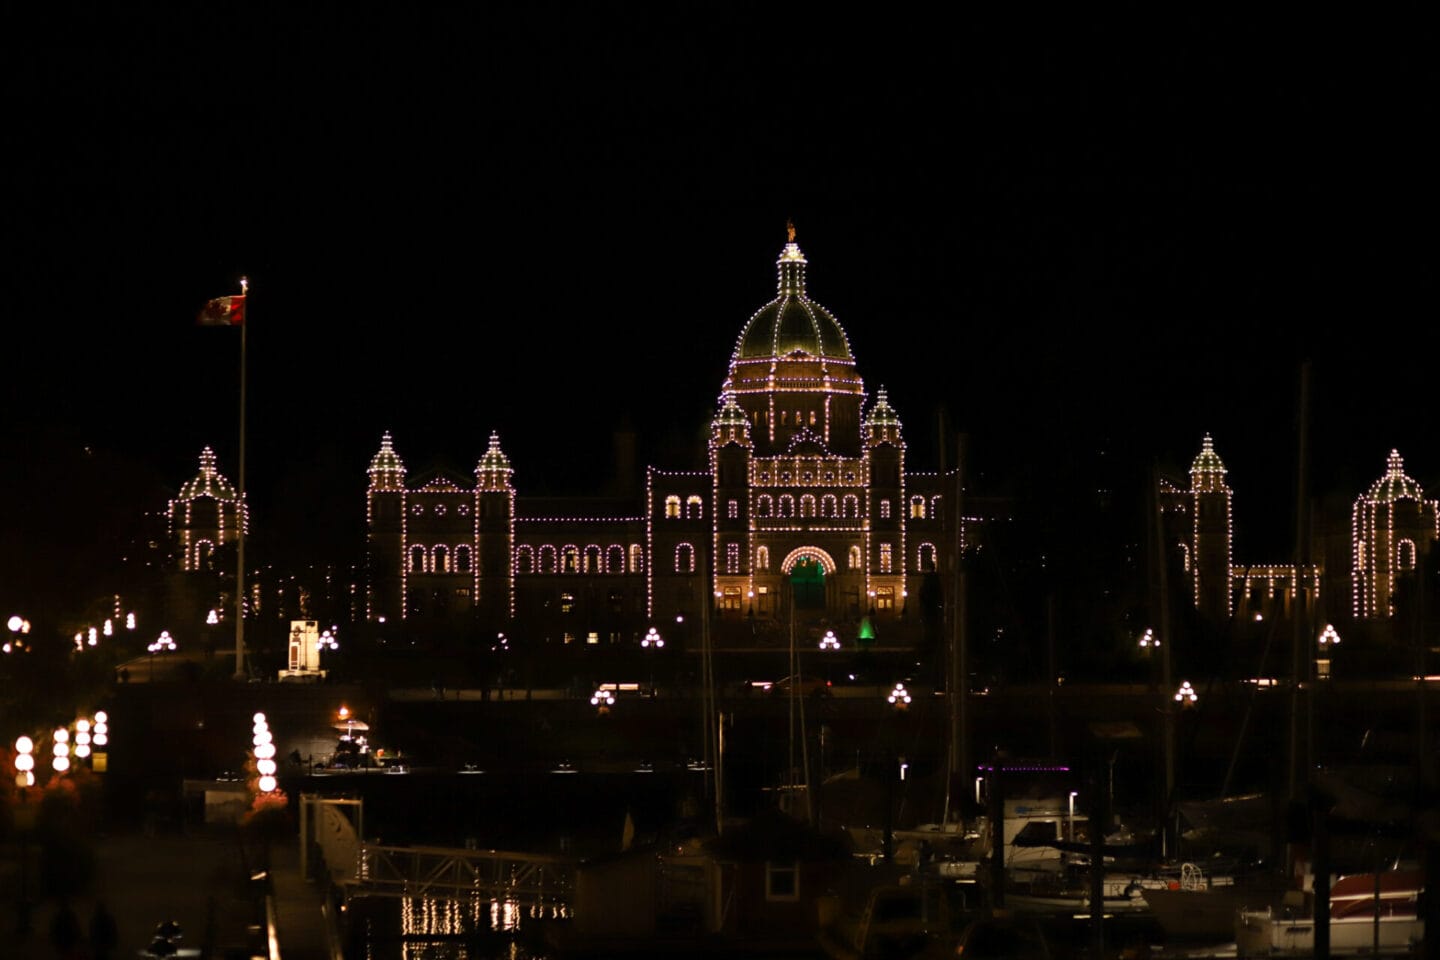 Parliament Buildings in Victoria BC at night